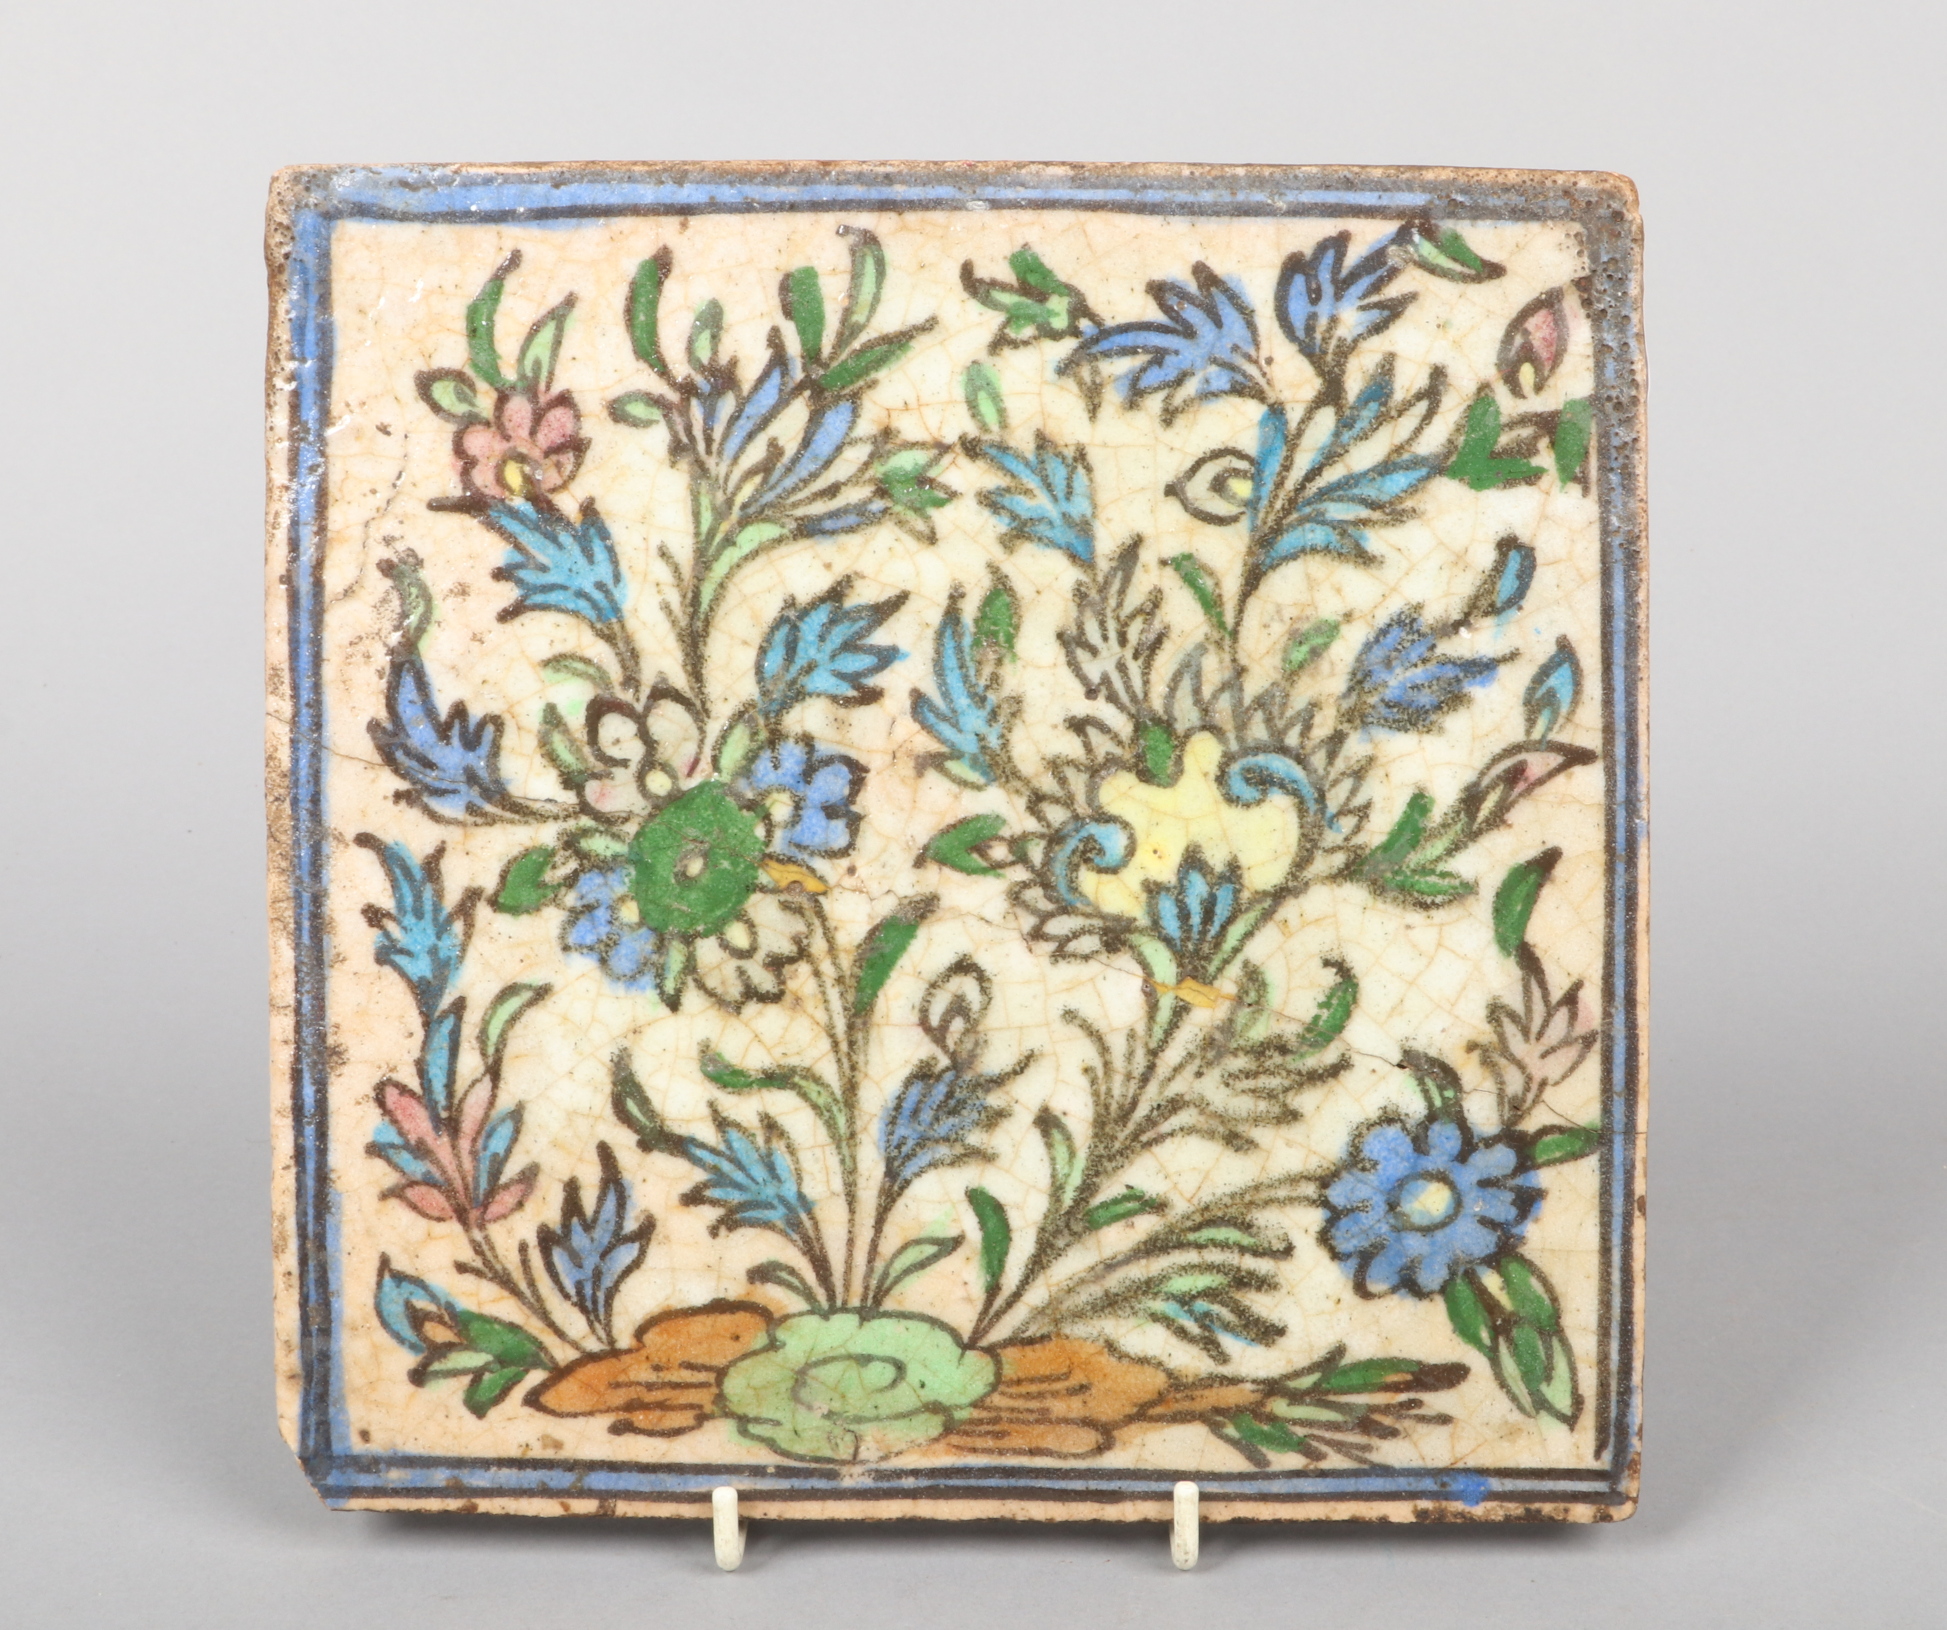 A 19th century Iznik square tile. Decorated with stylized flowers in polychrome enamels under a blue